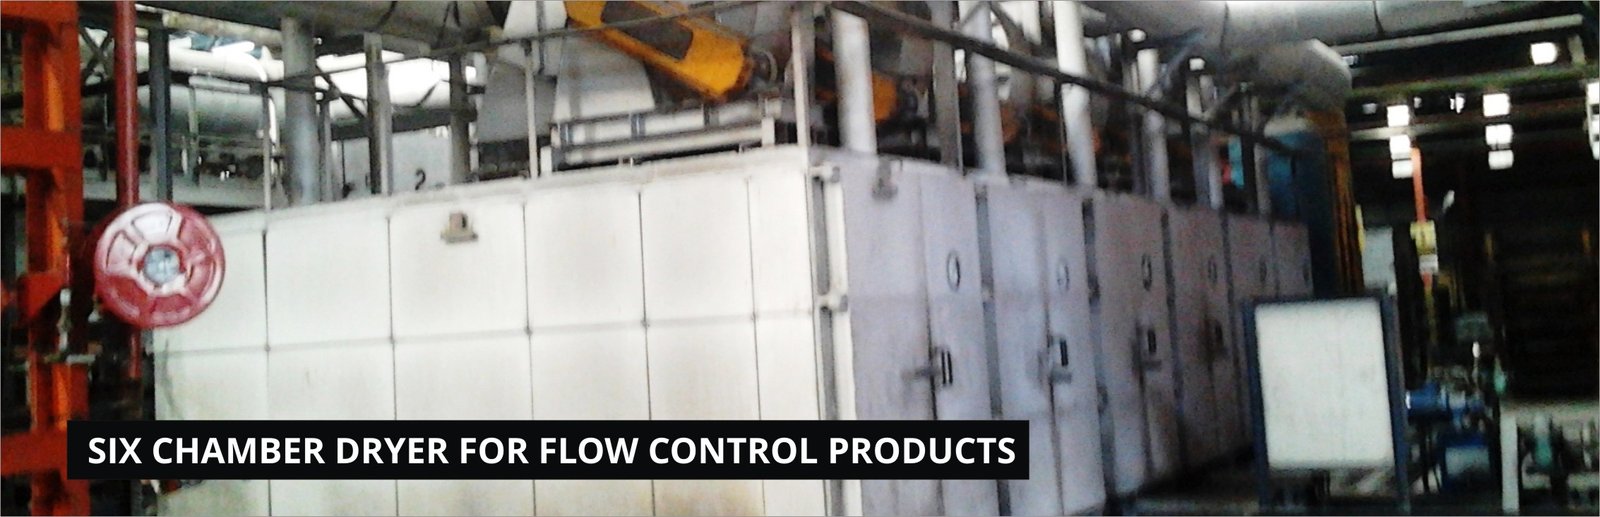 dryer for flow control products